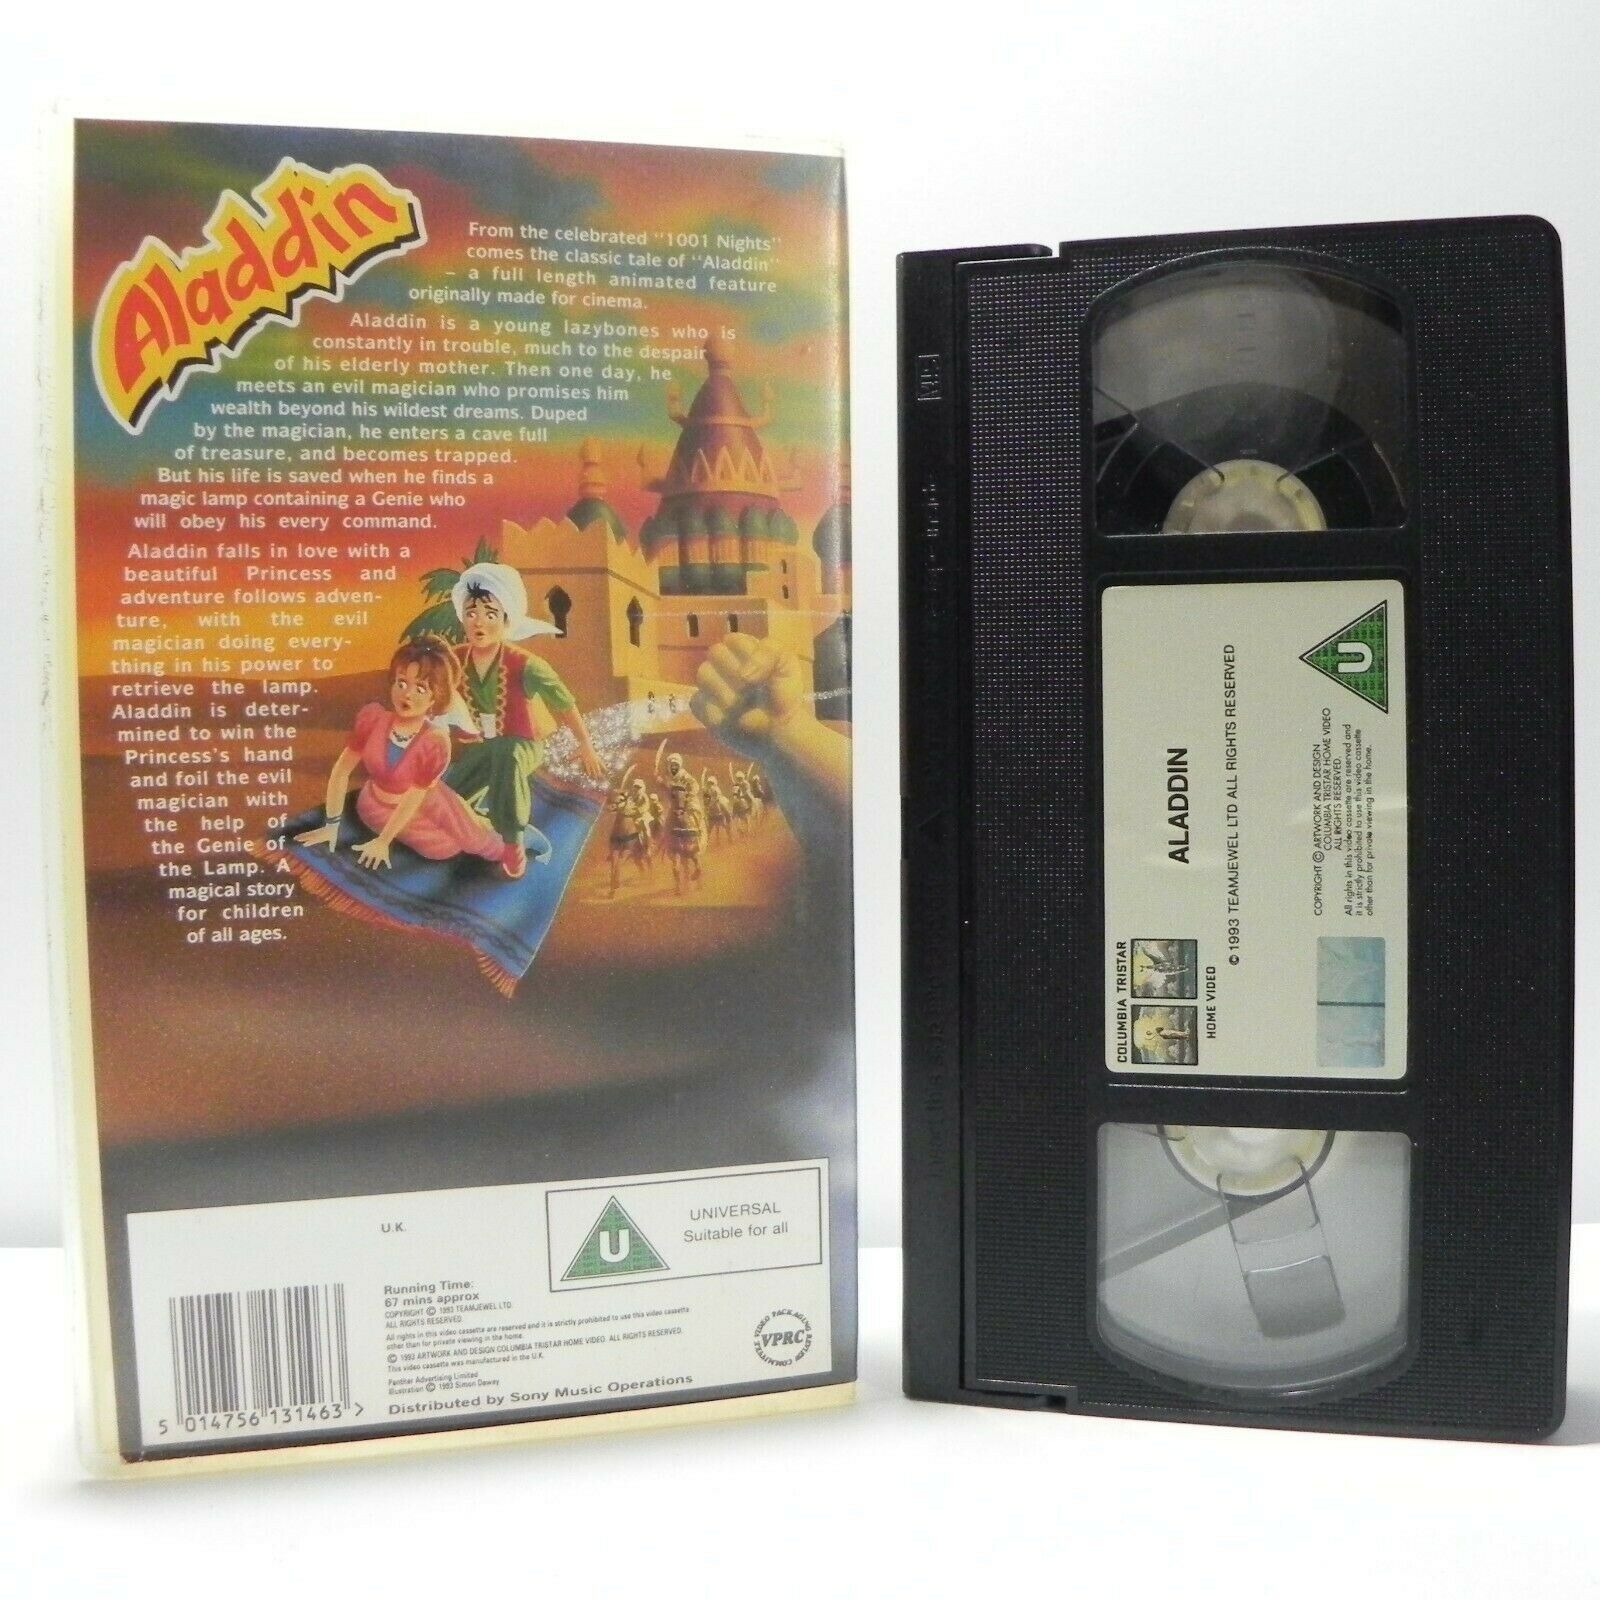 Aladdin - Animated - New Version - Classic Children's Tale - Magical Story - VHS-